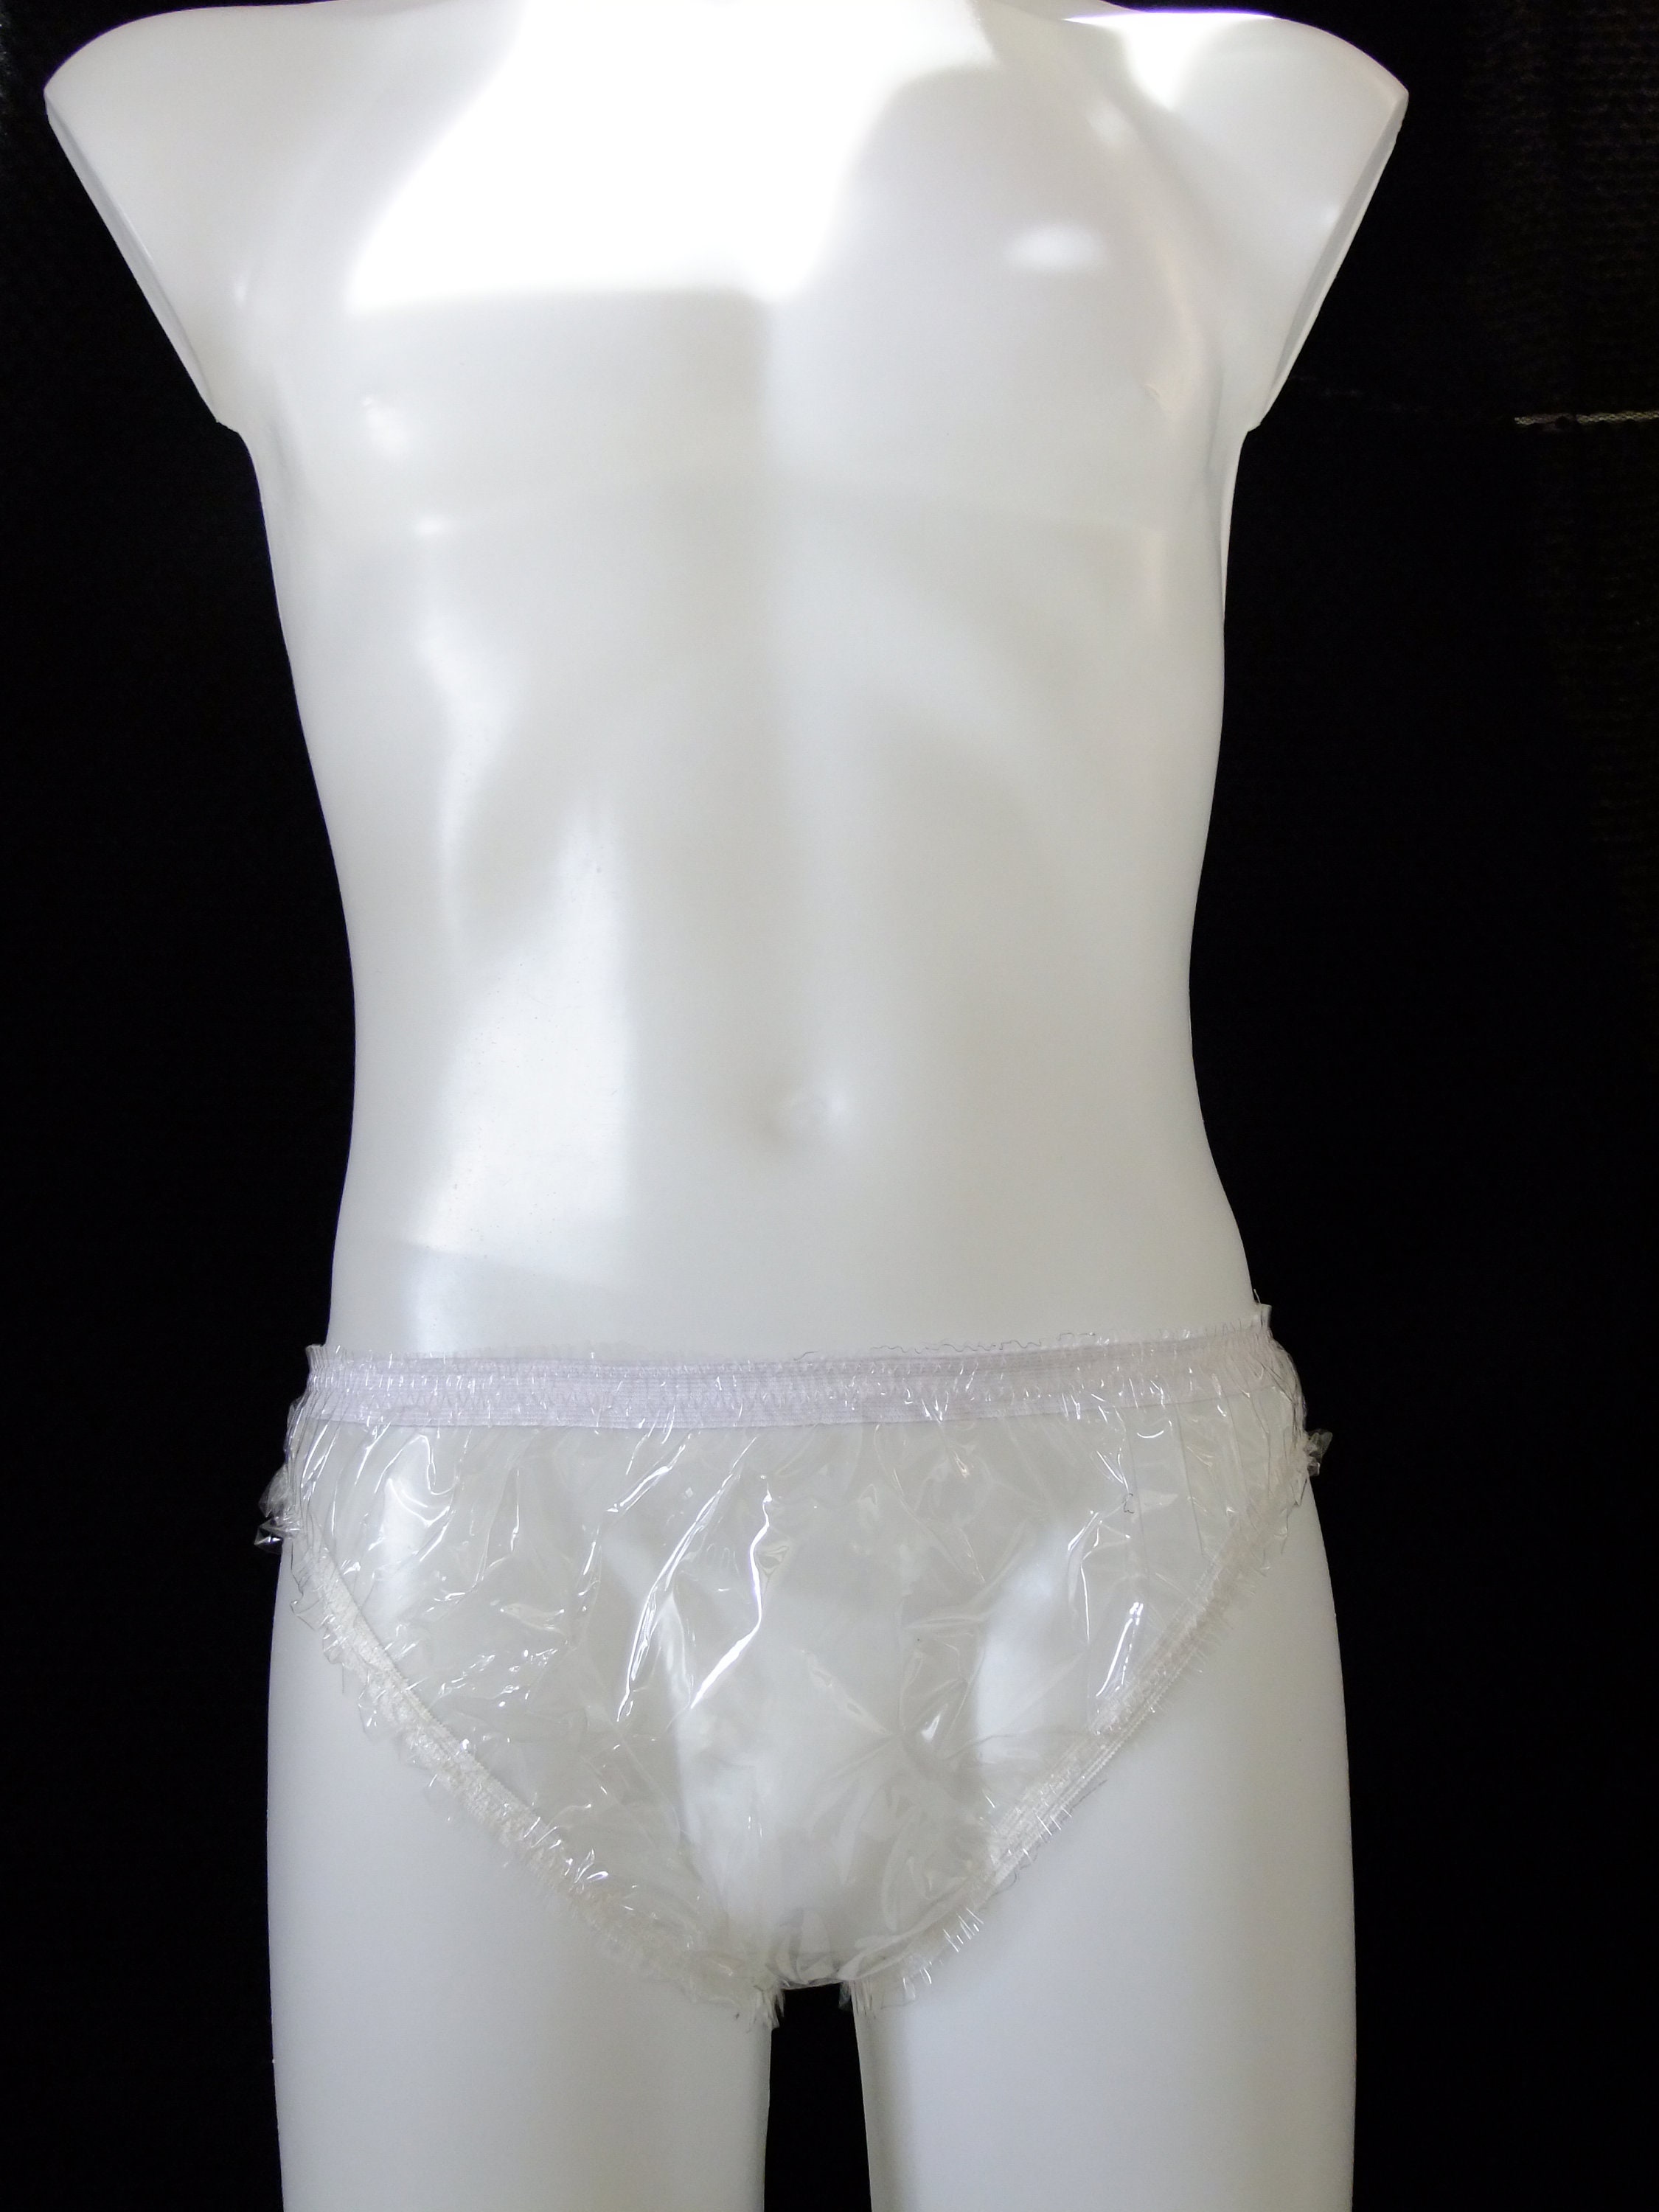 Glass Clear PVC Panties Briefs Tanga Pants Plastic Knickers Roleplay Skimpy  Sexy